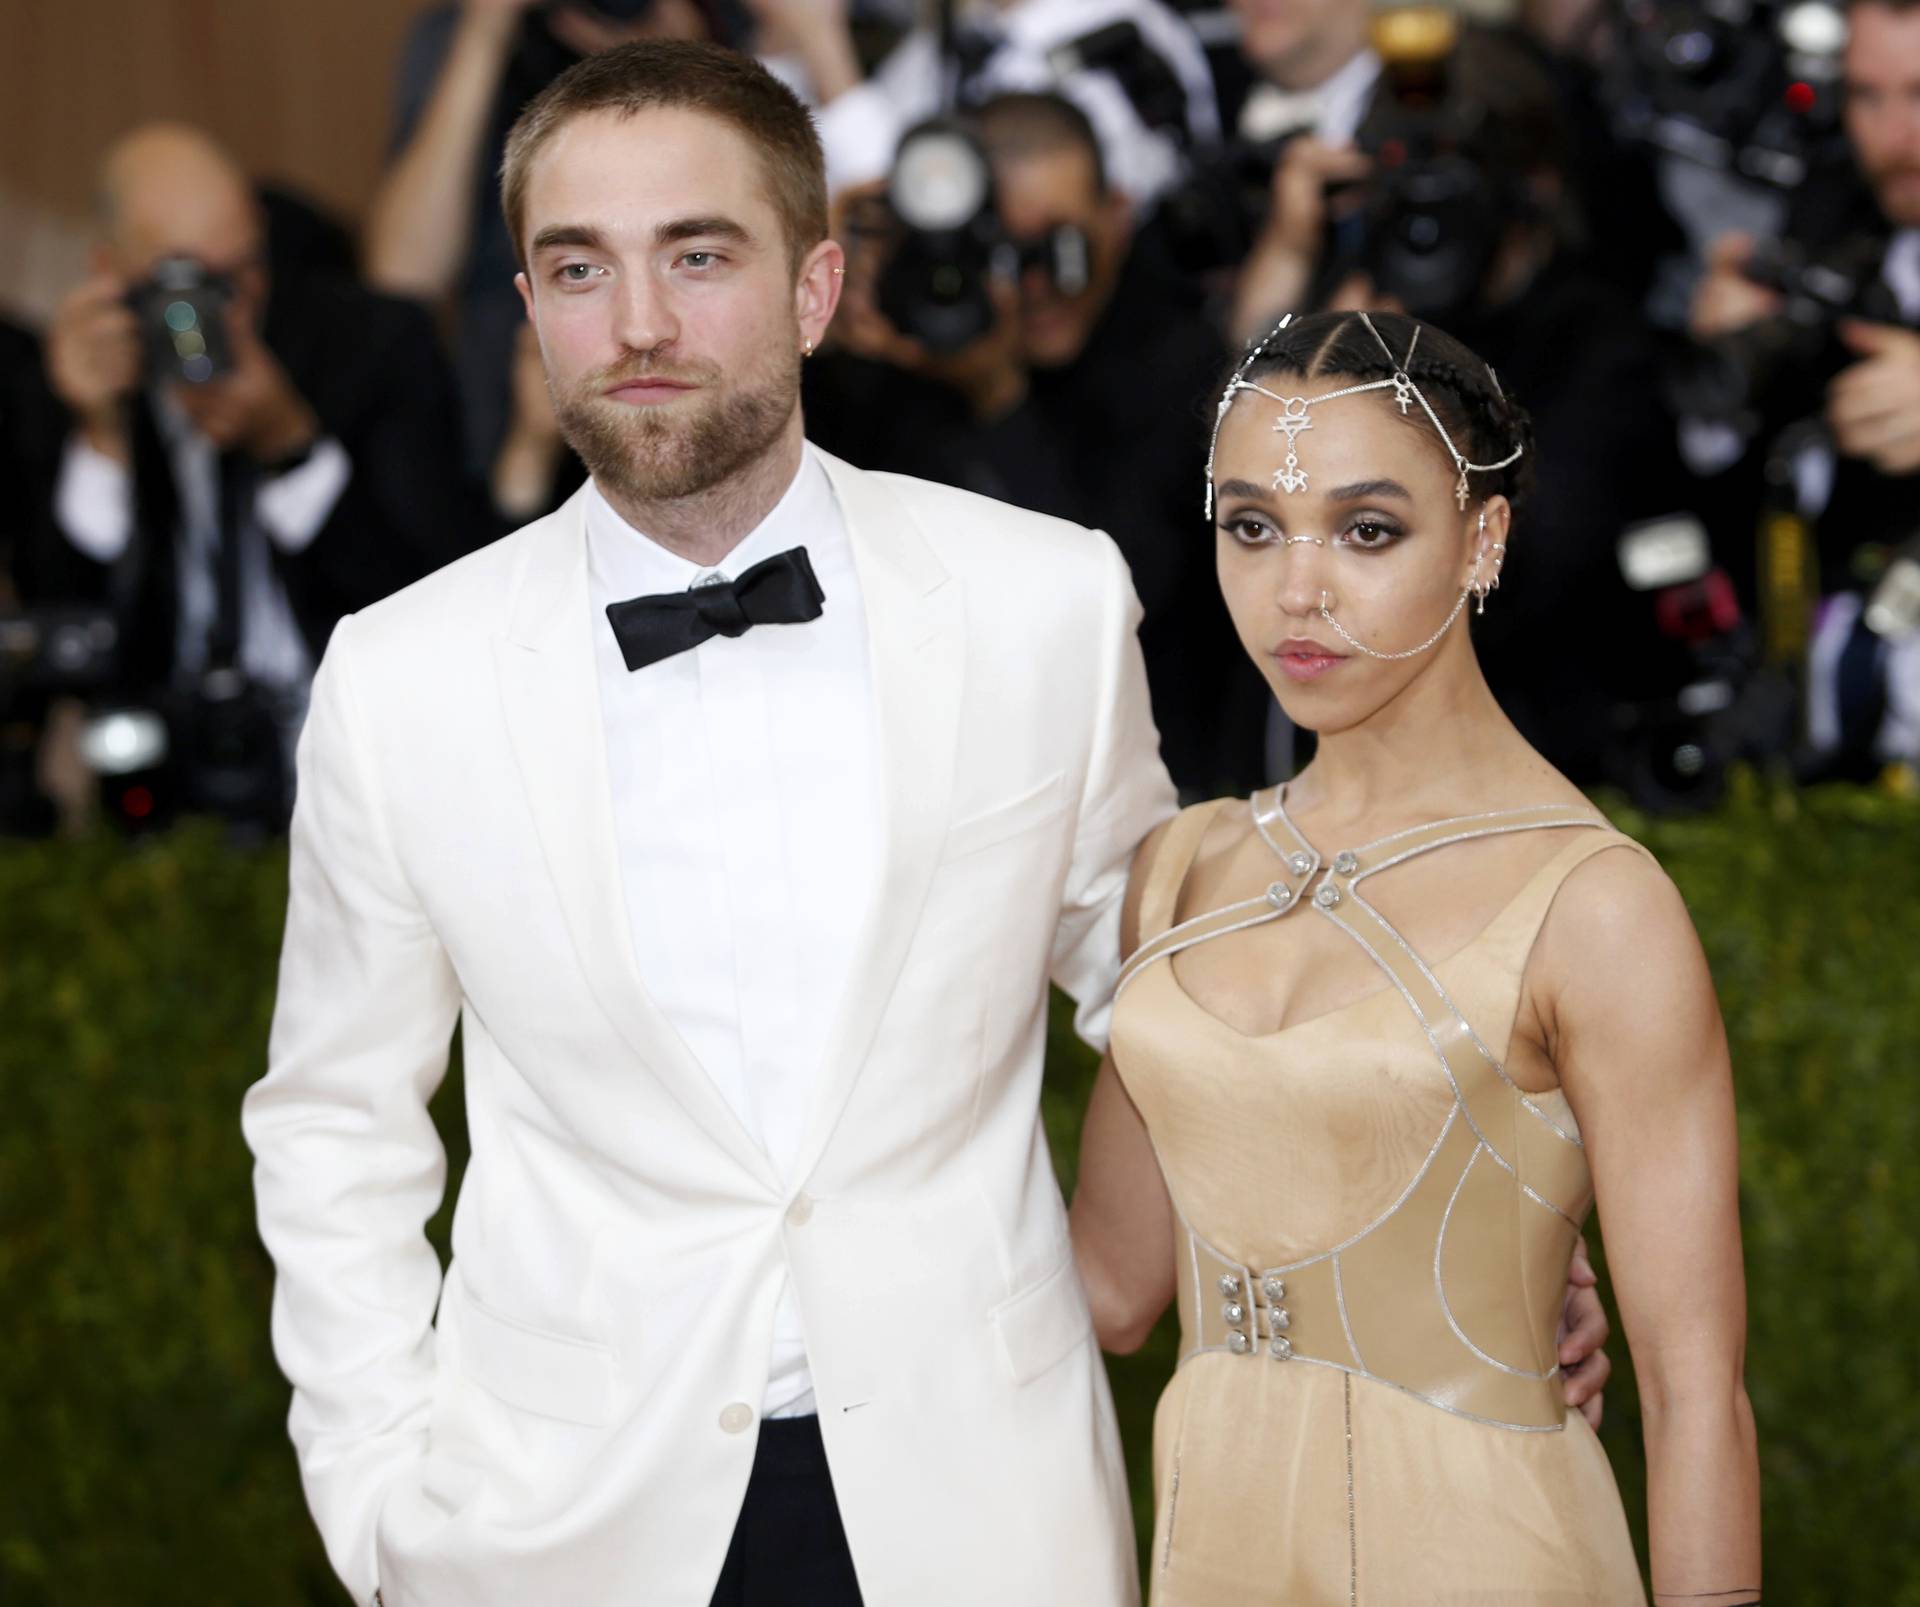 Singer-songwriter FKA Twigs and actor Pattinson arrive at the Met Gala in New York